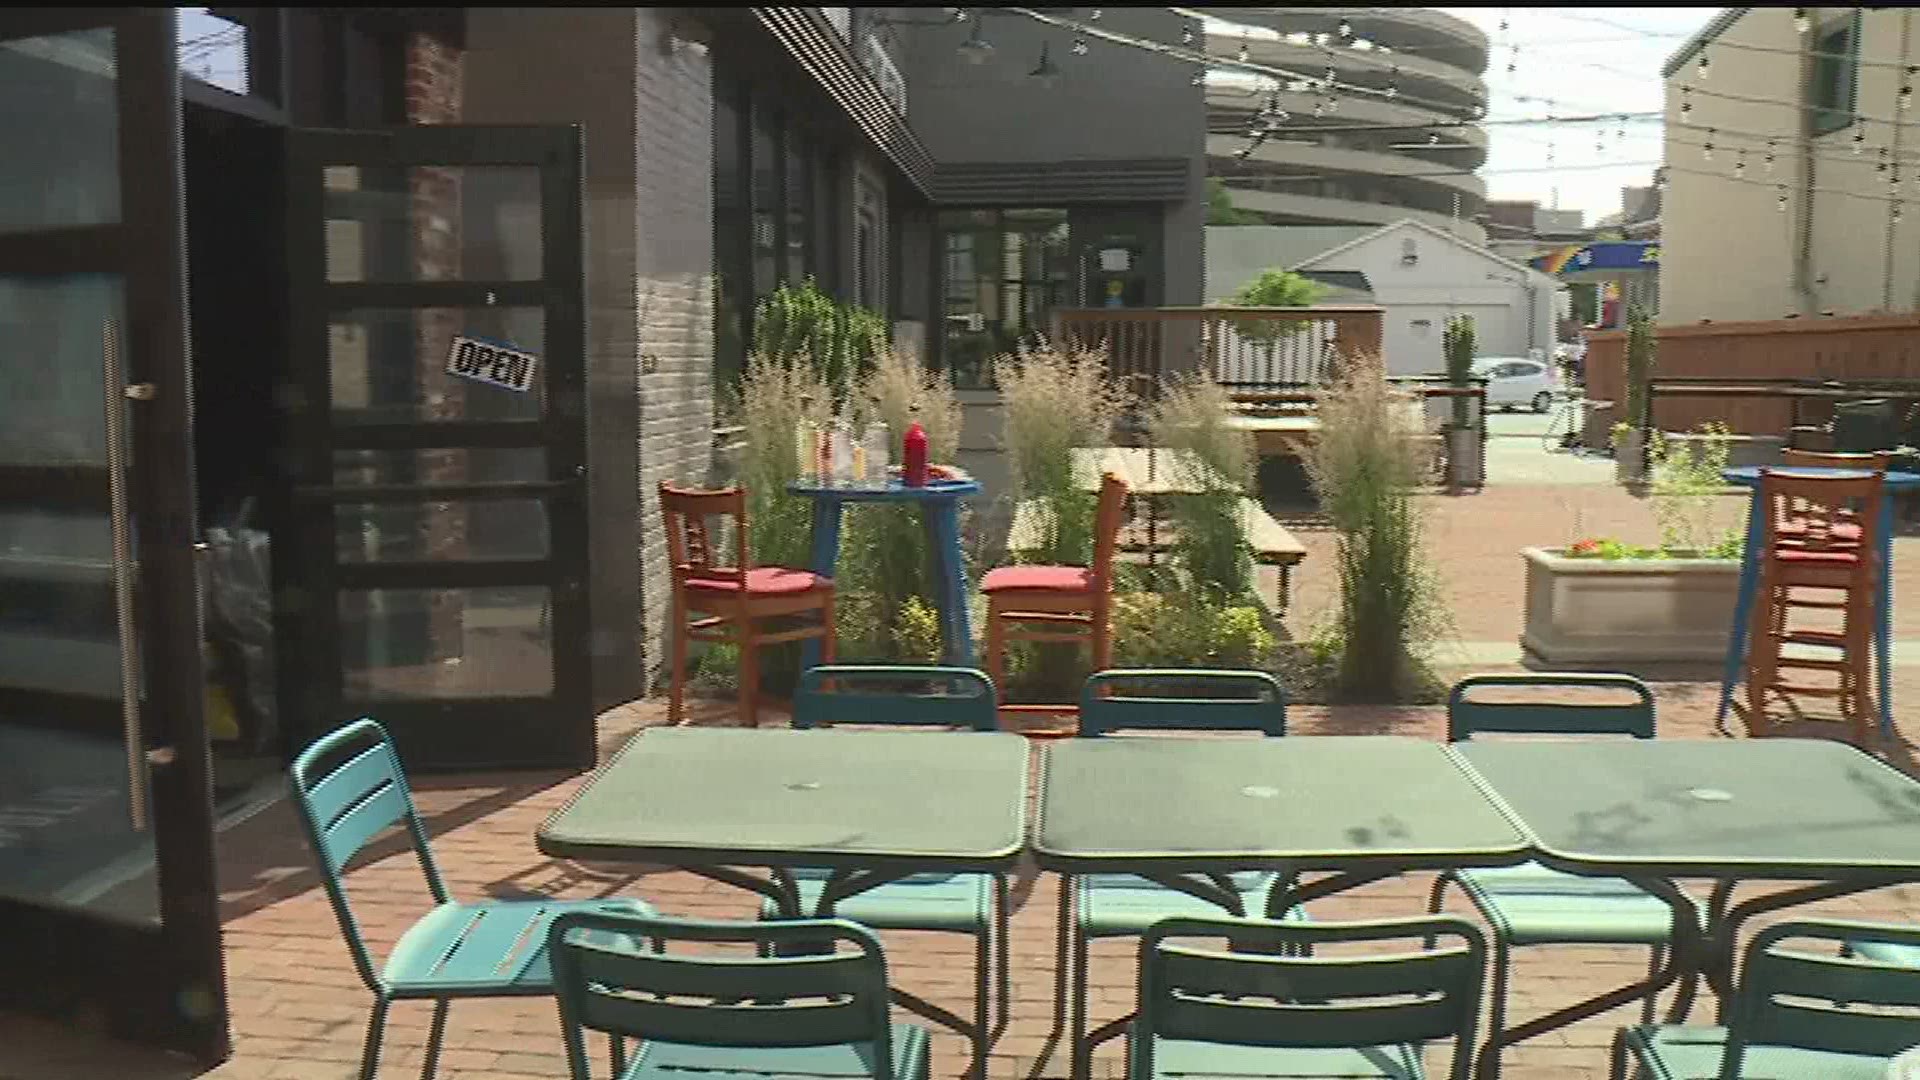 Outdoor Seating Begins Today for Lancaster County how local businesses are responding to being able to open their doors once again